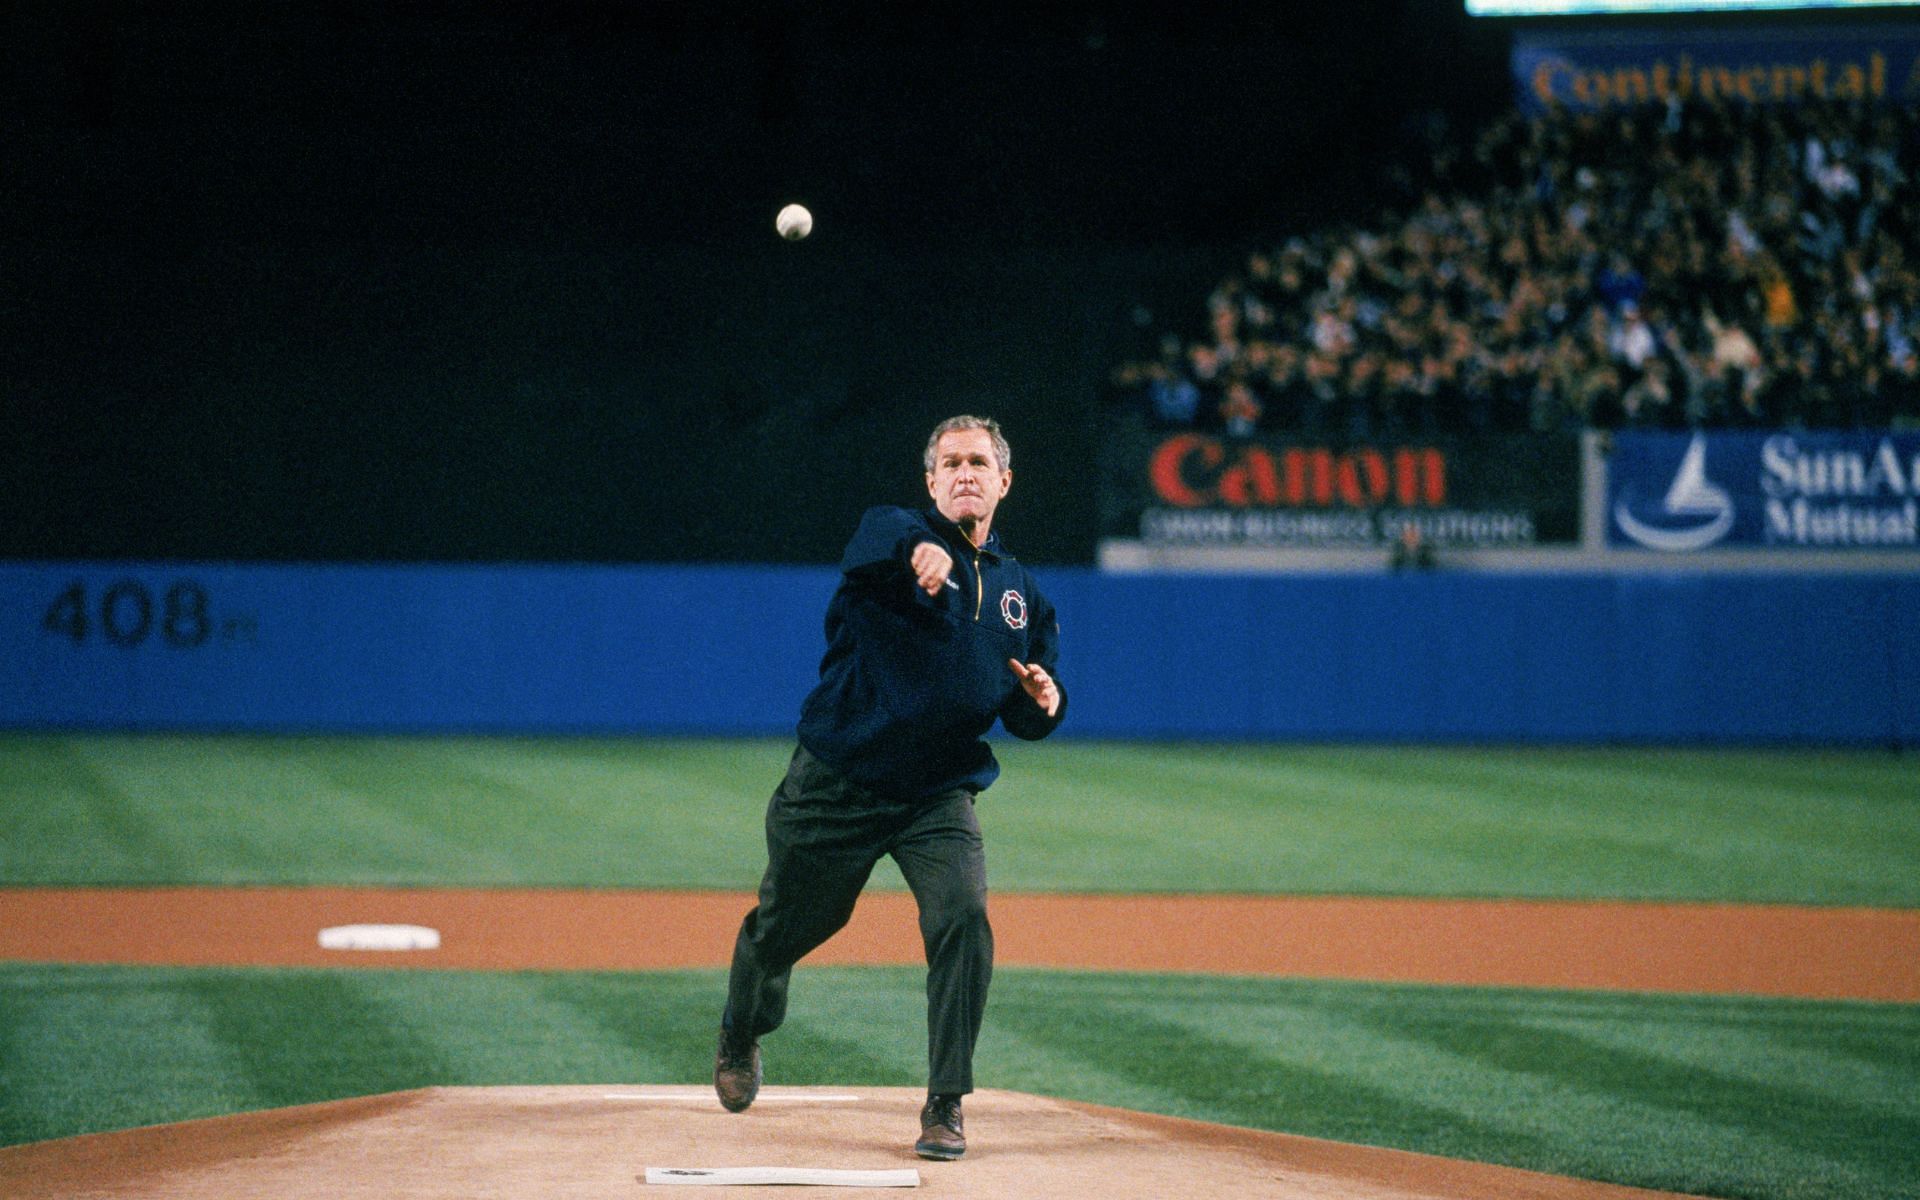 George W. Bush threw a perfect ceremonial pitch before Game 3 of the World Series in New York [Credits: 911memorial.org]